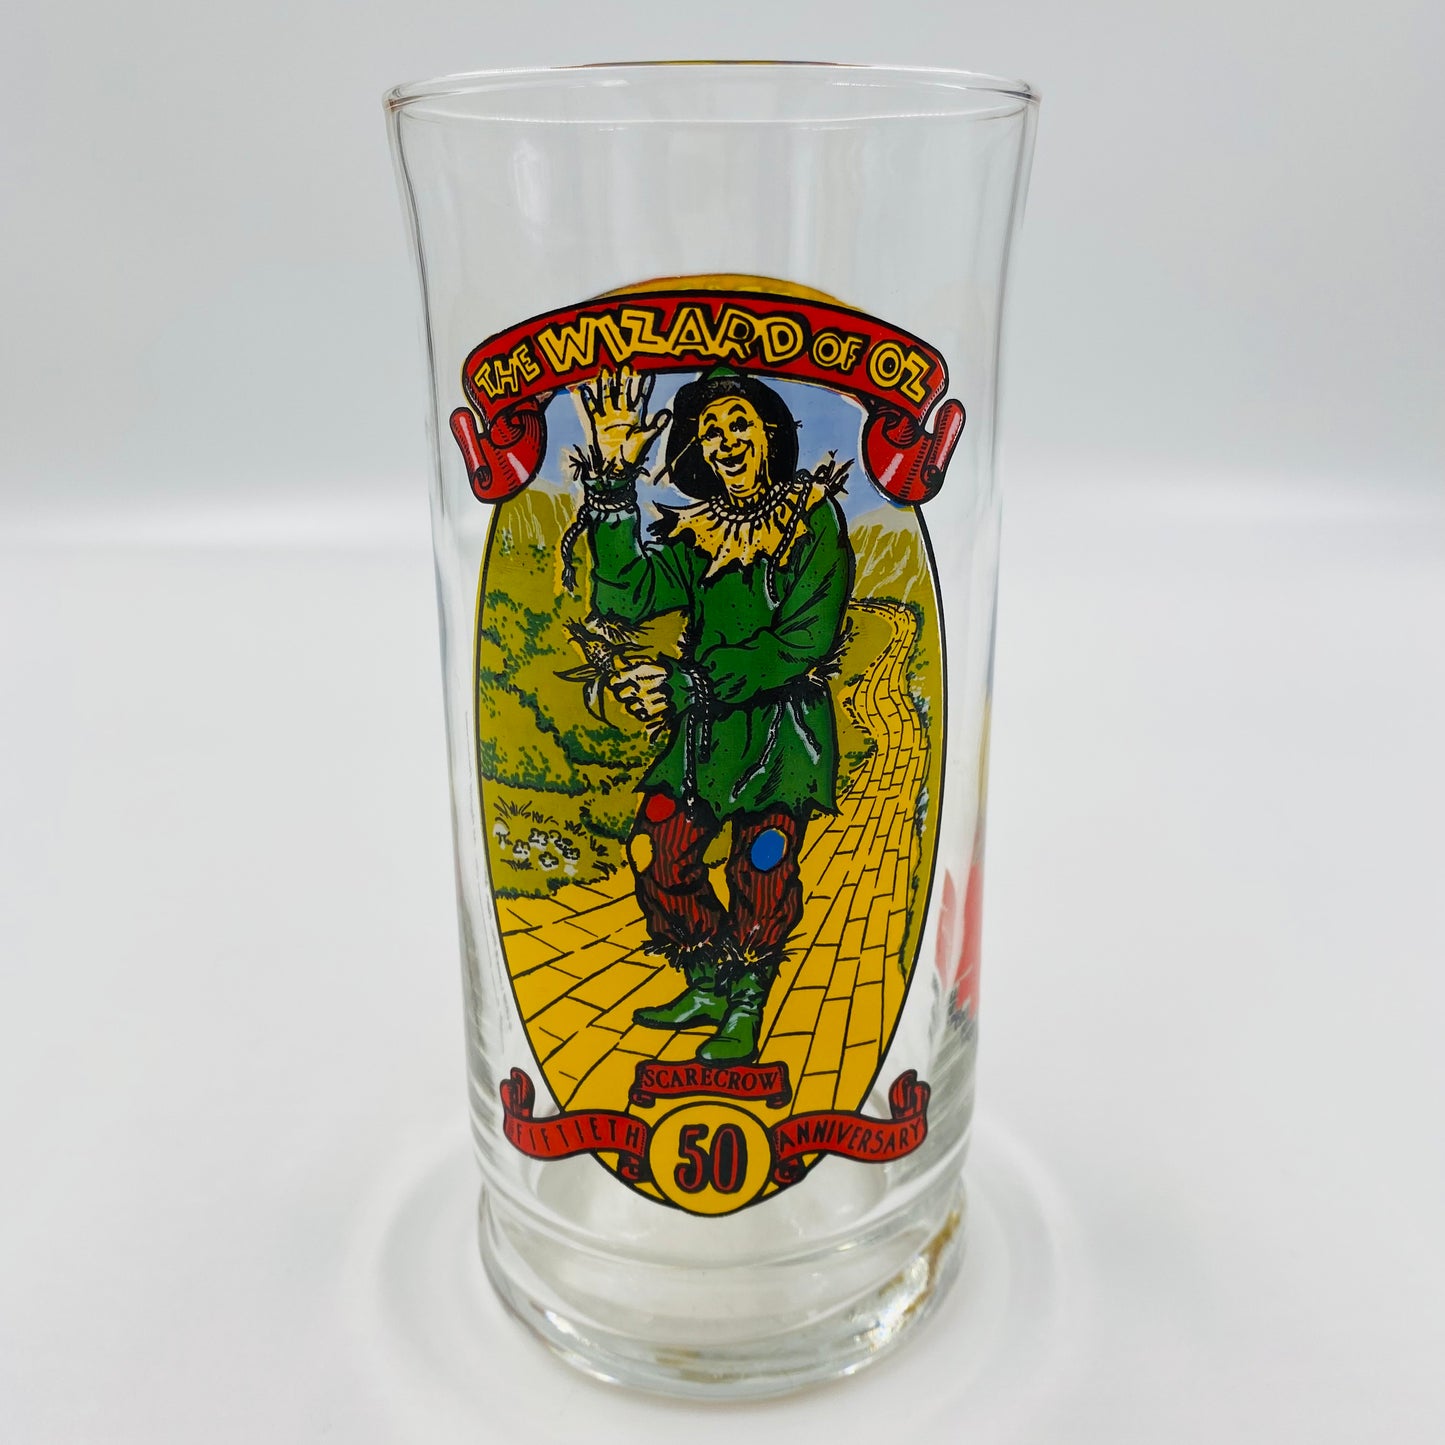 Wizard of Oz Coca-Cola drinking glasses set of 6 includes Dorothy, Scarecrow, Tin Man, Cowardly Lion, Glinda & The Wicked Witch (1989)